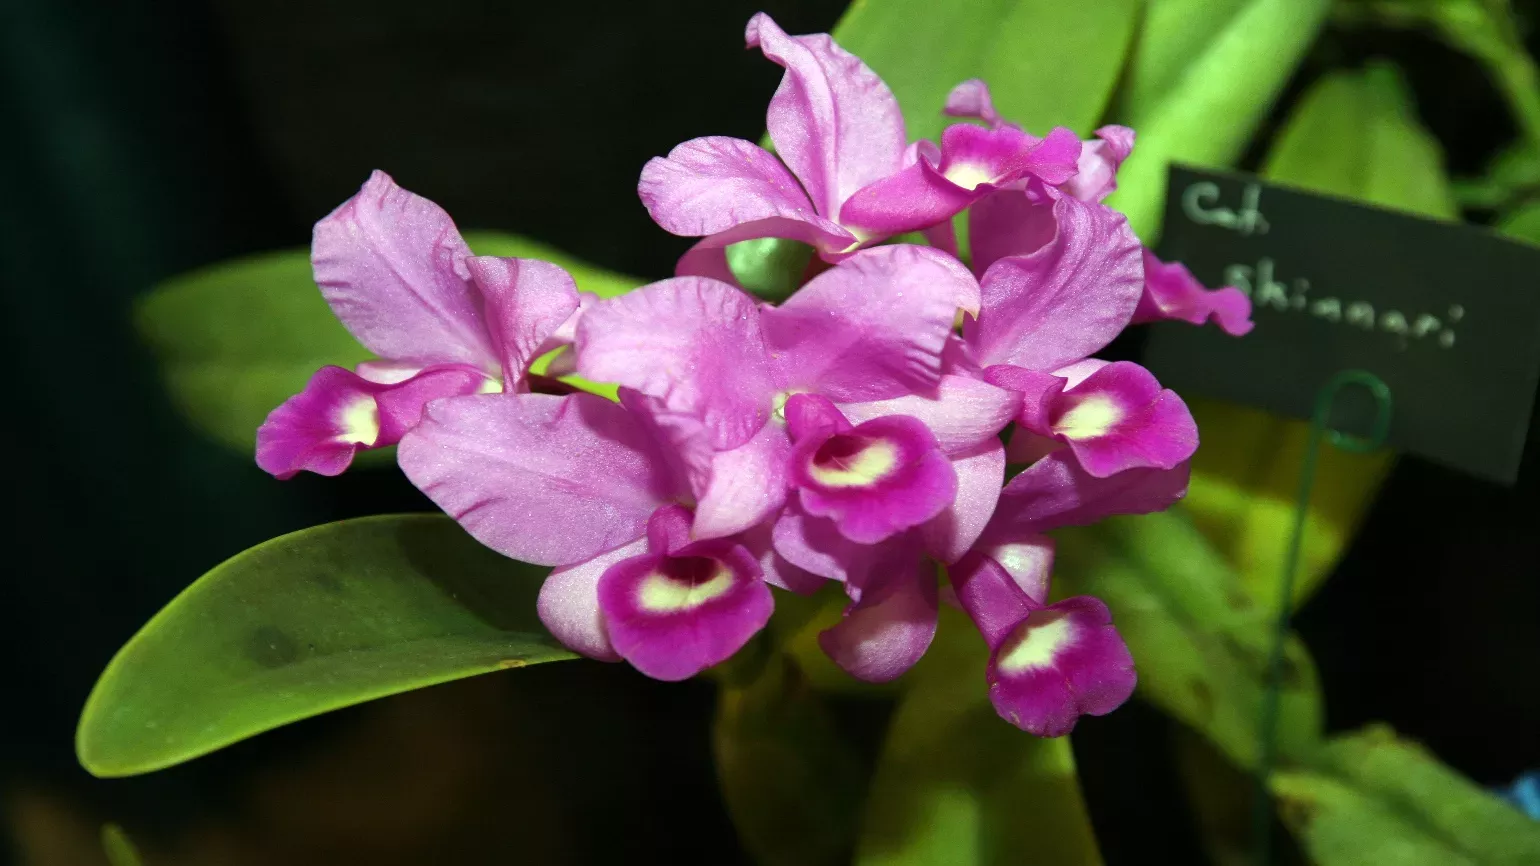 A cluster of pink orchid flowers in front of green leaves